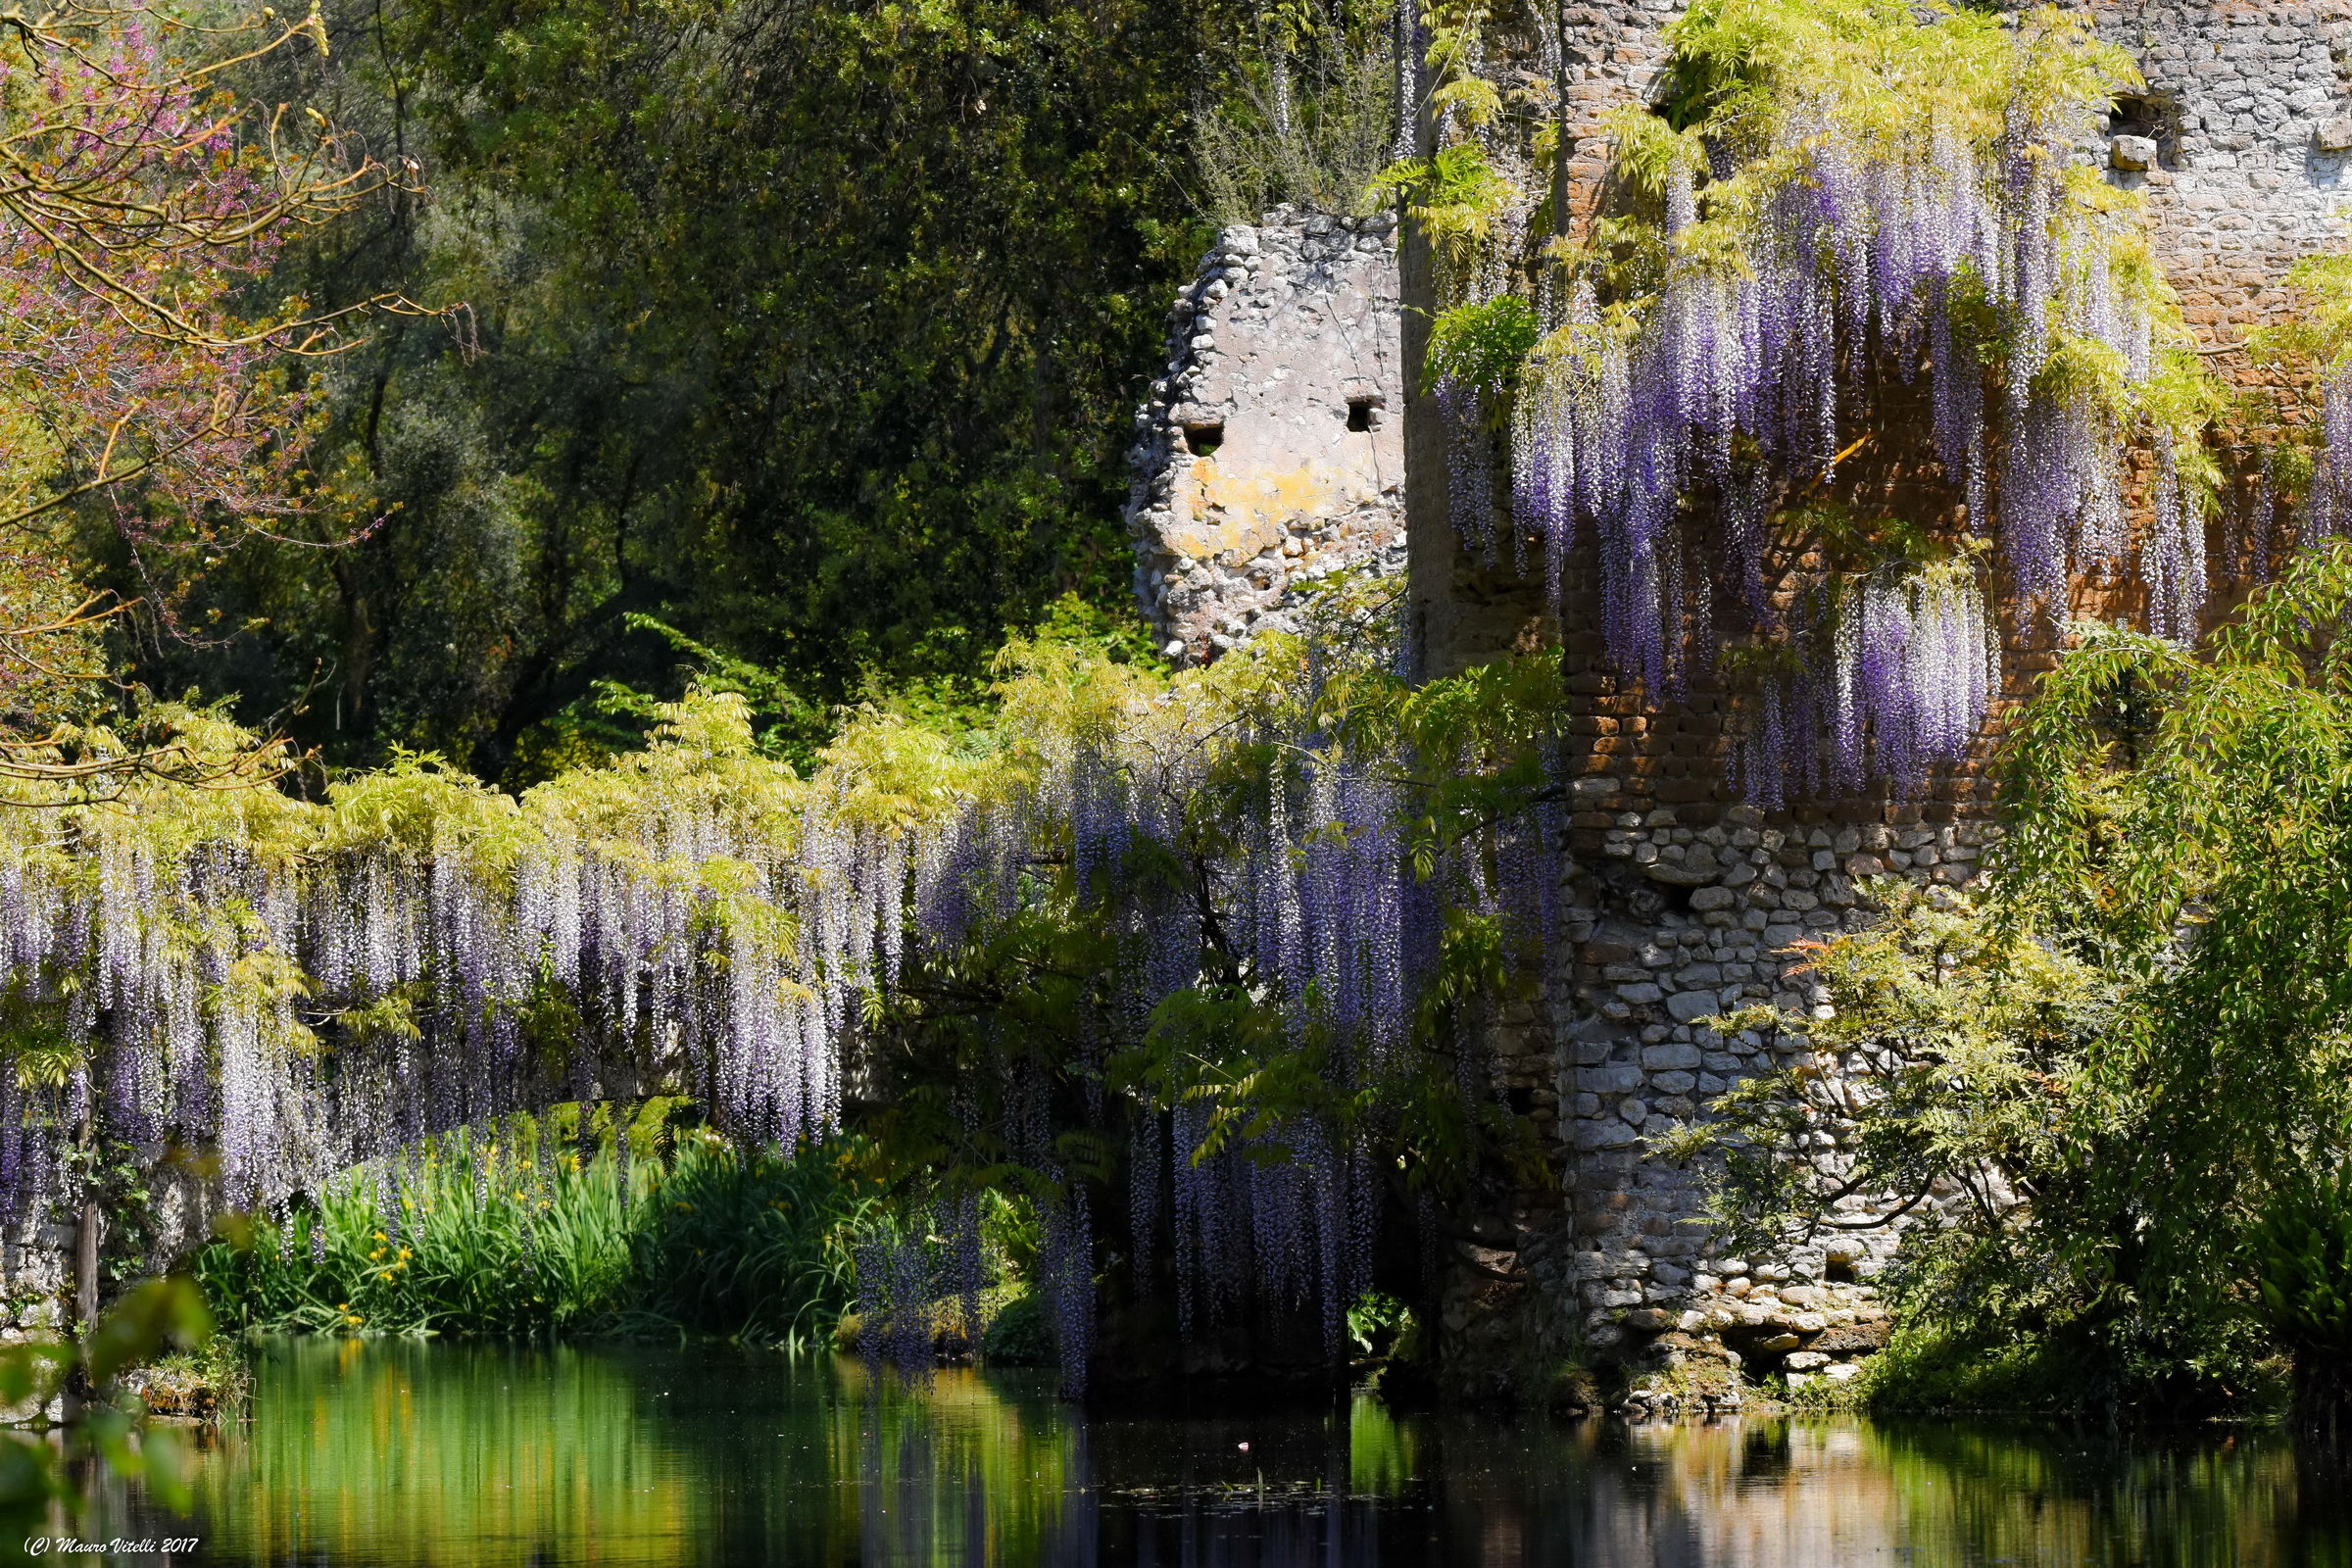 A view of the river Ninfa...